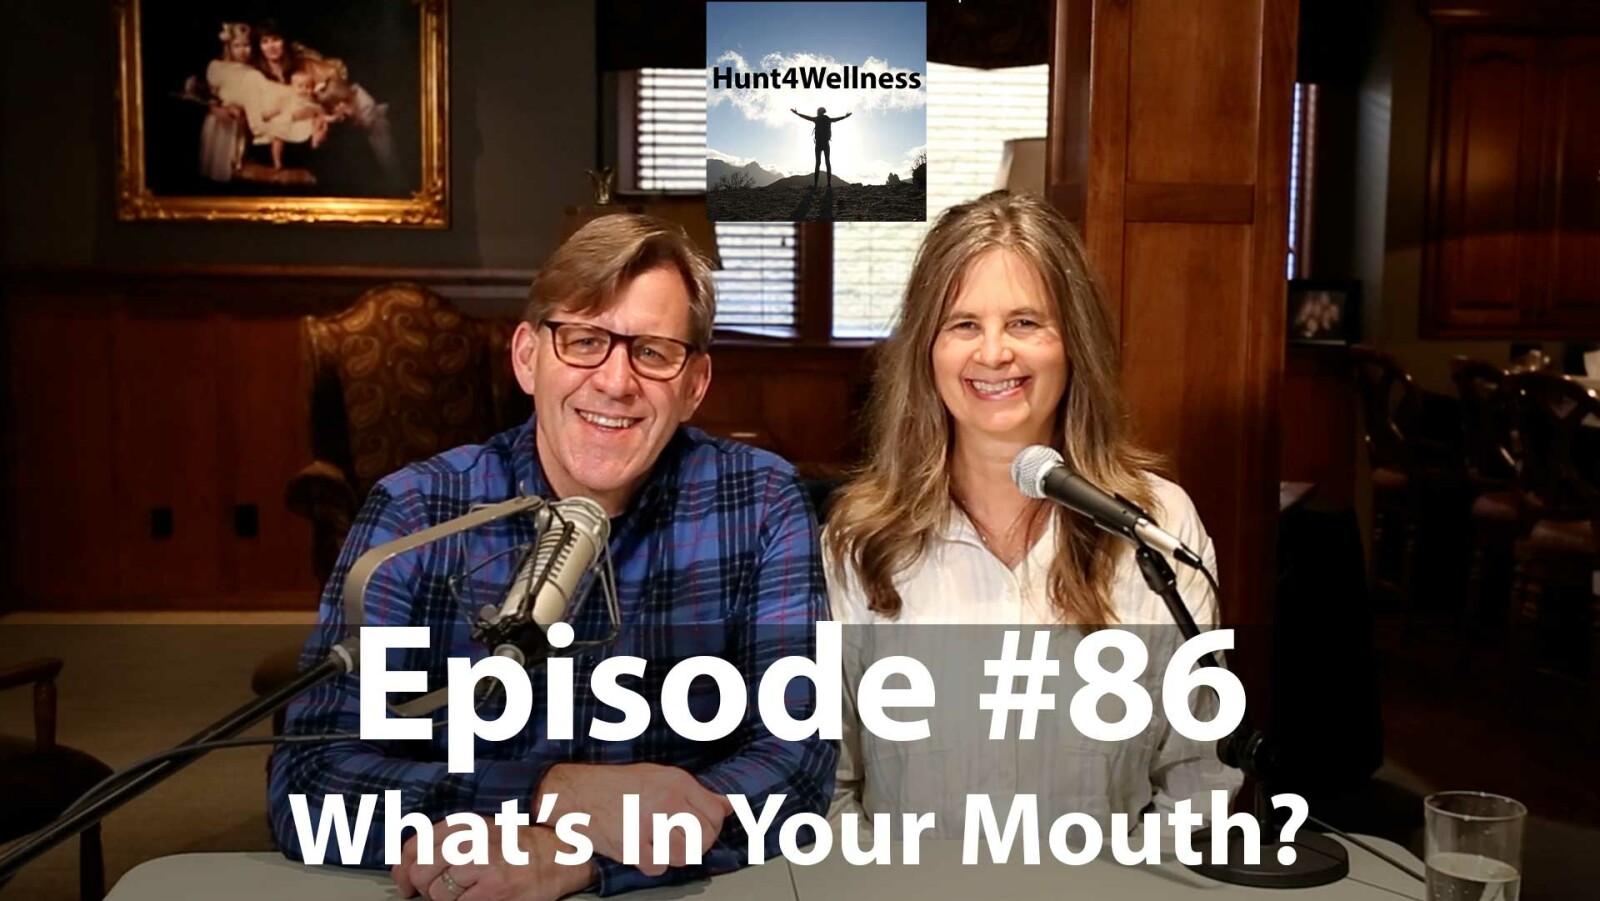 Episode #86 - What's In Your Mouth?